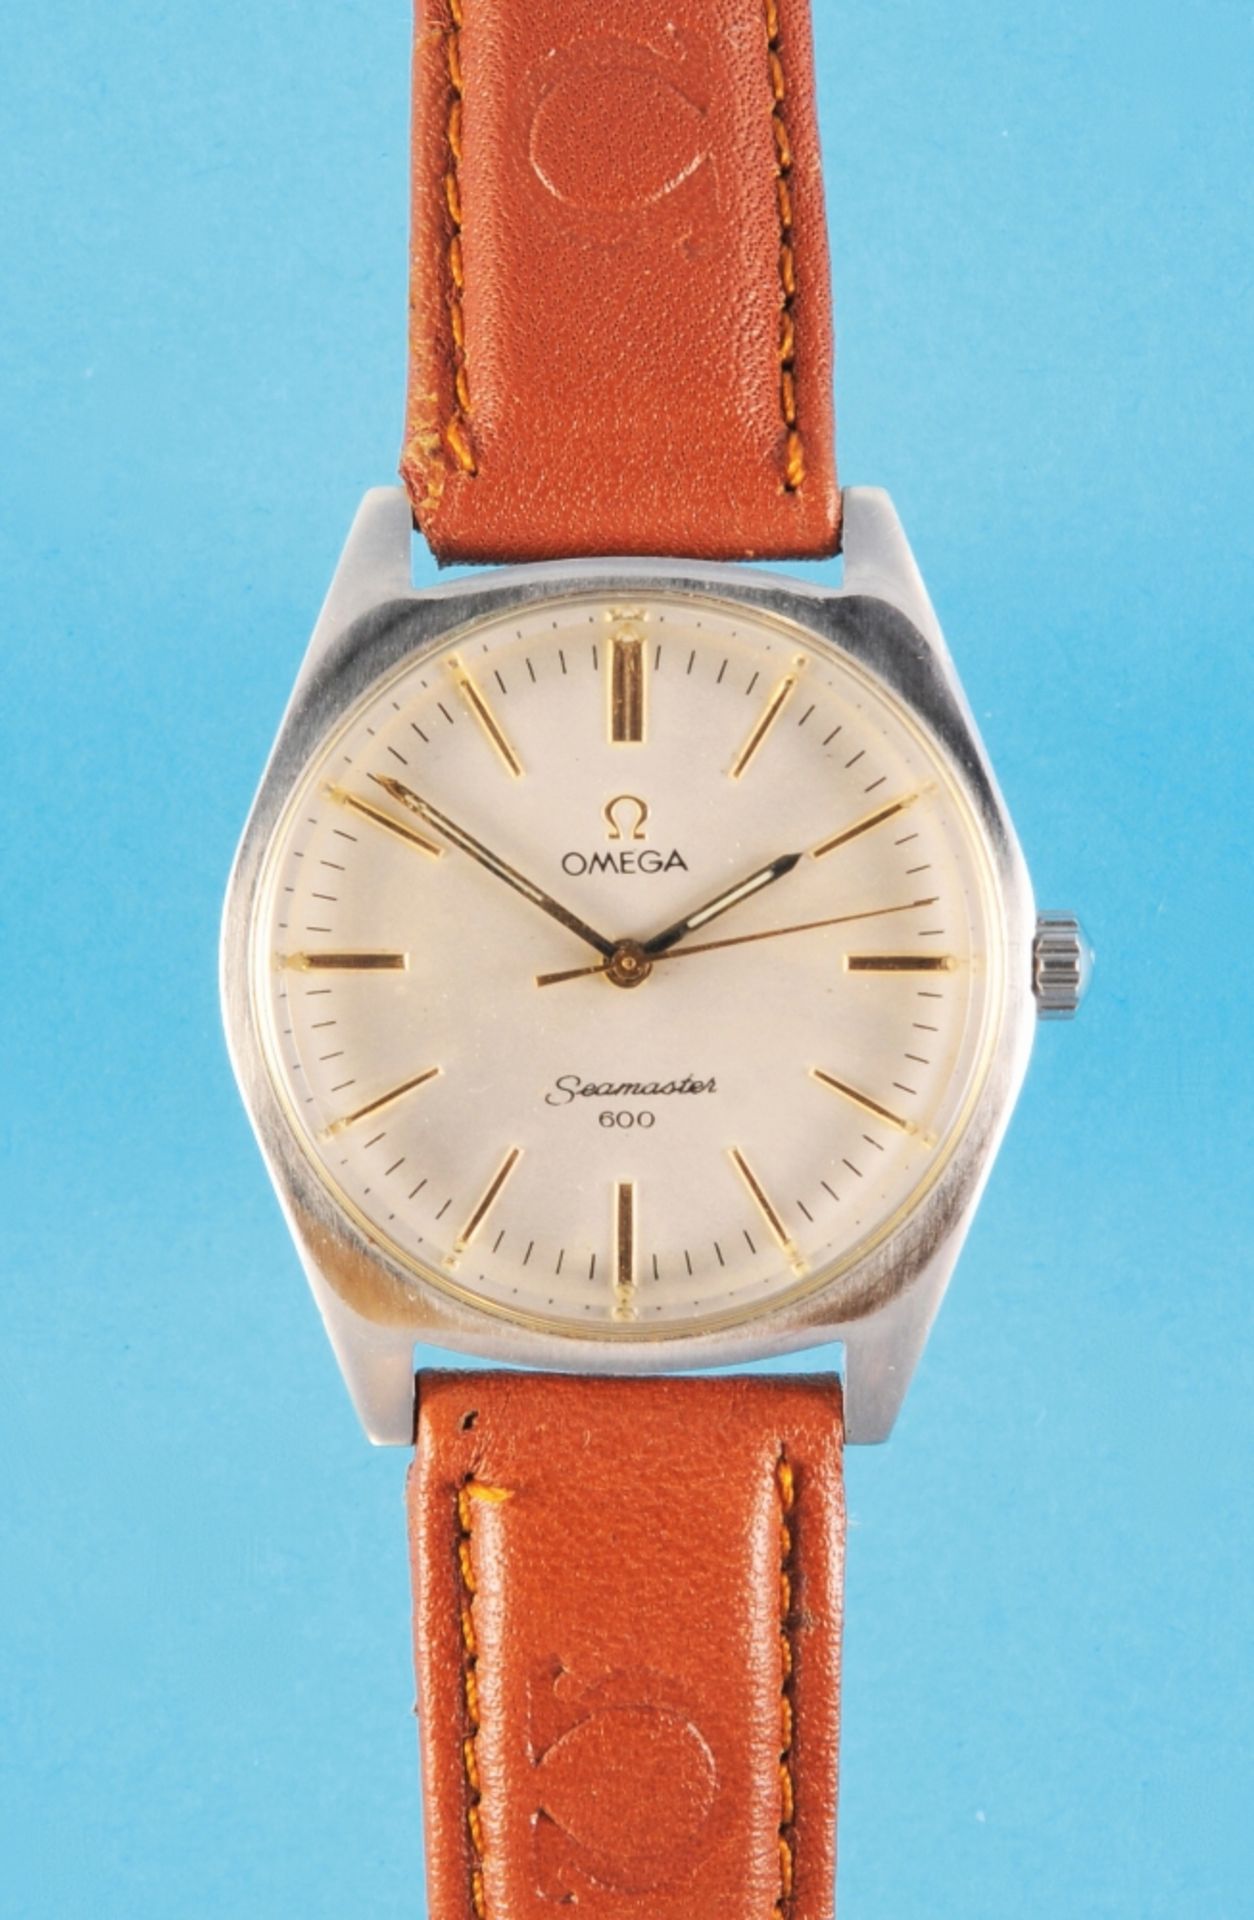 Omega Seamaster 600, wristwatch with central second hand, ref. 135.011, cal. 601, 17 jewels, circa 1